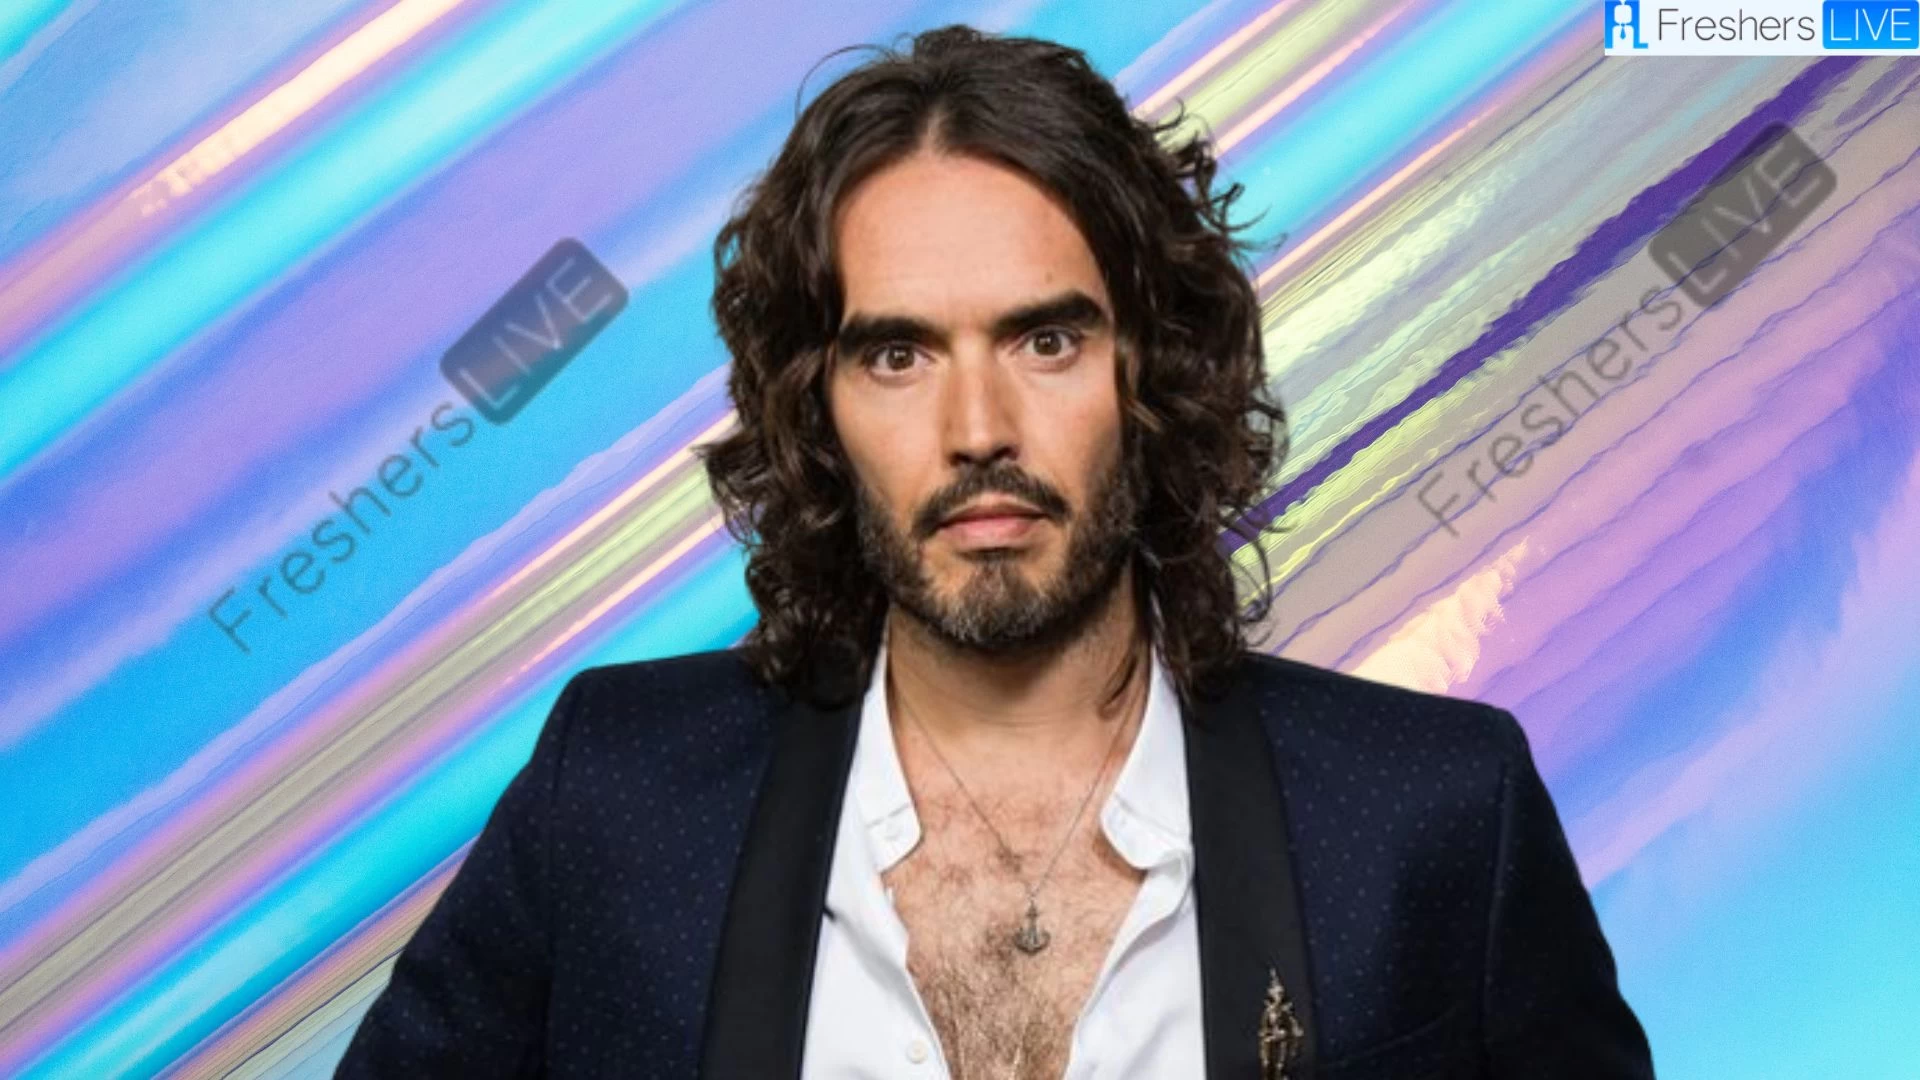 Russell Brand Ethnicity, What is Russell Brand's Ethnicity?